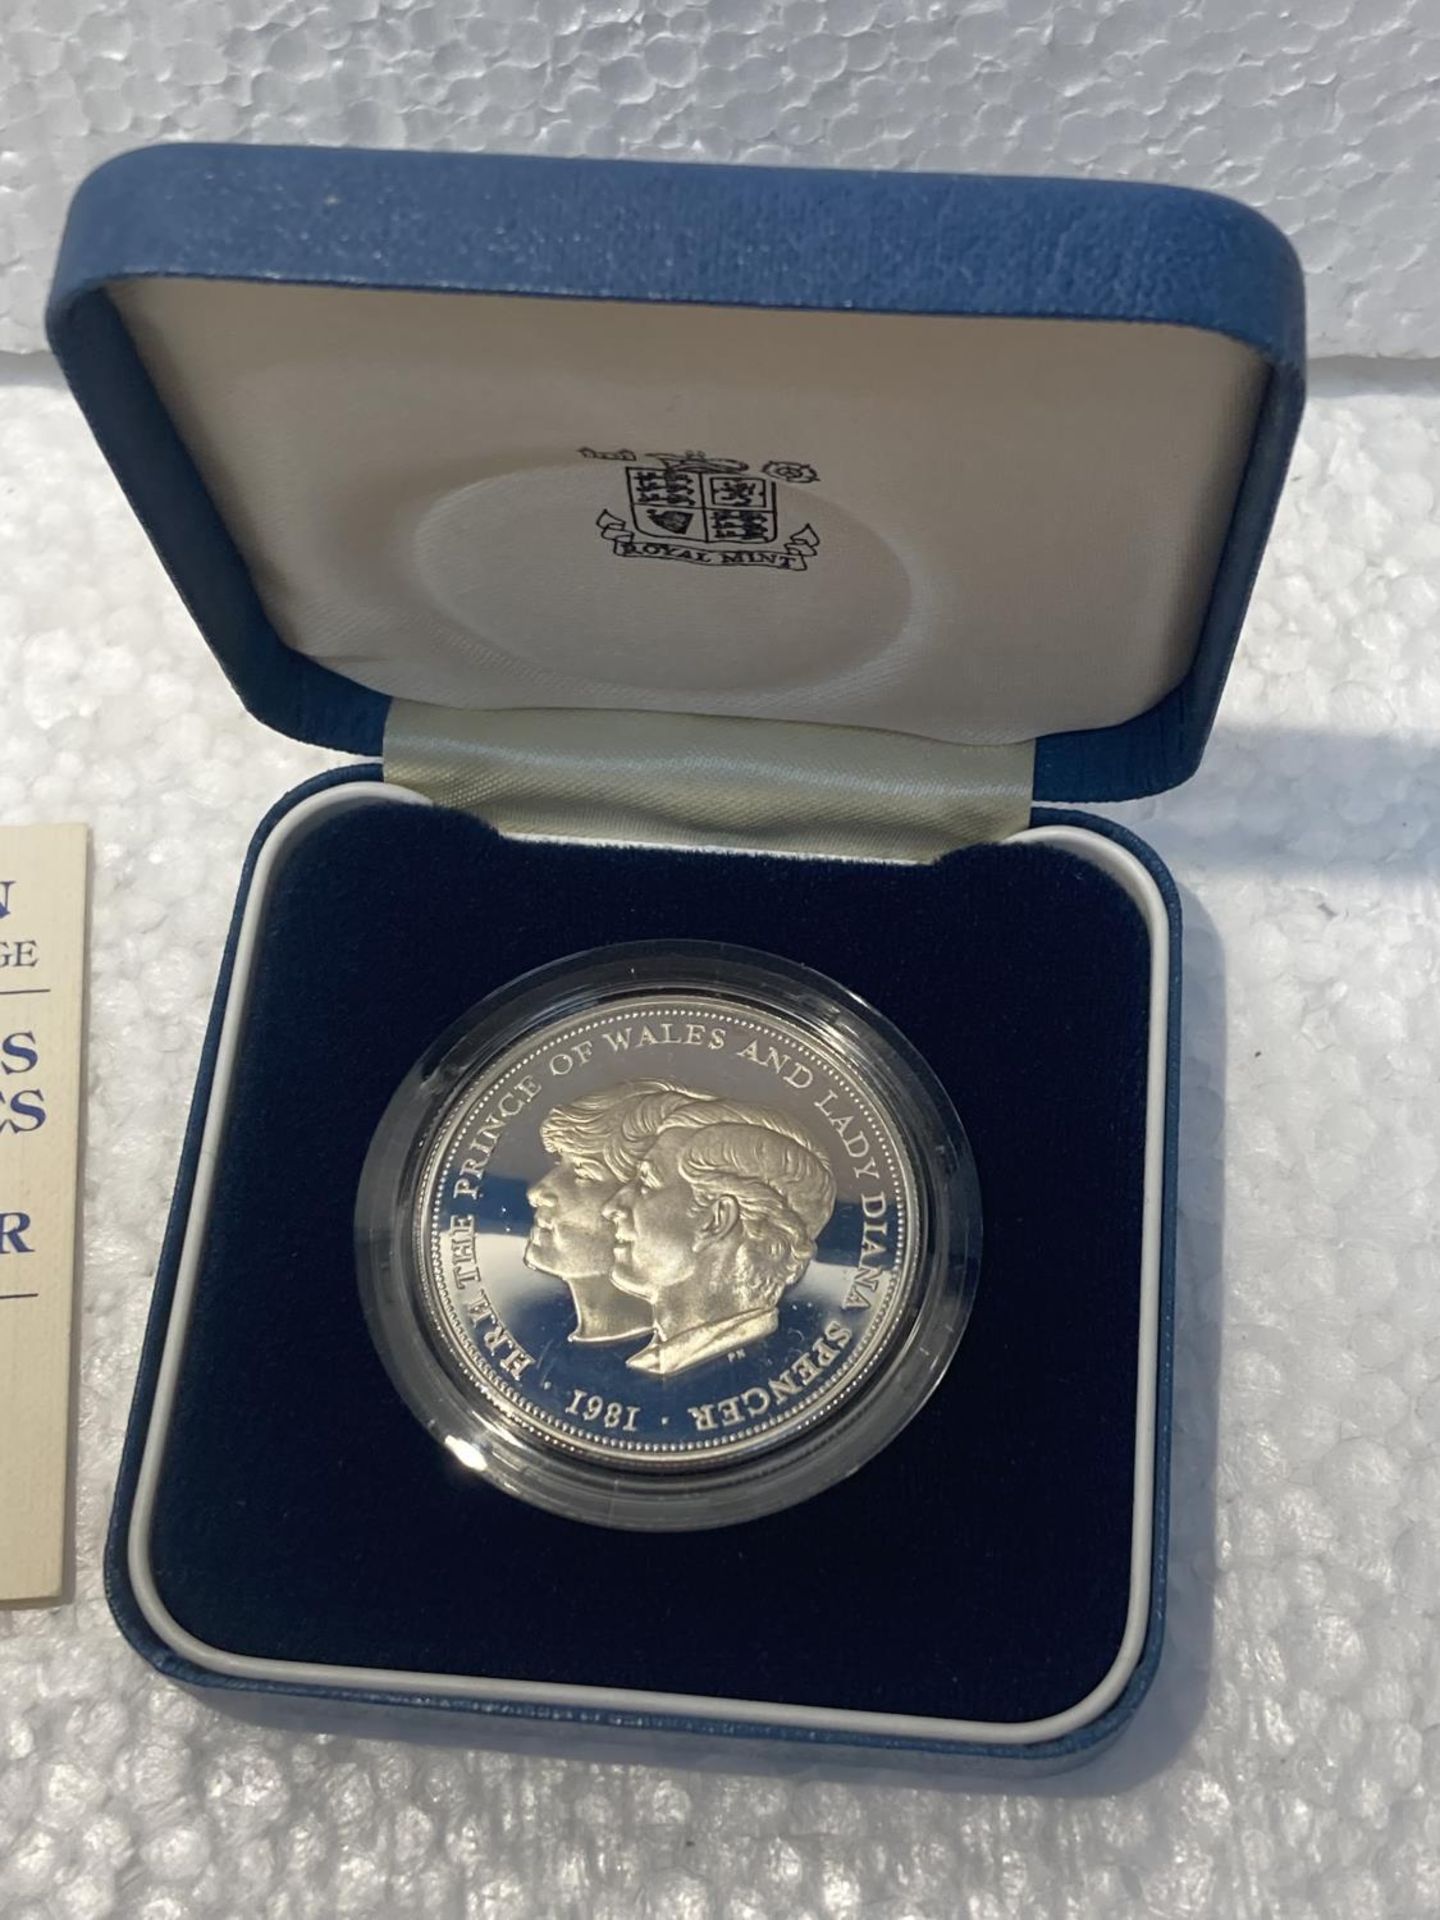 A ROYAL MINT 1981 MARRIAGE OF HRH PRINCE OF WALES AND LADY DIANA SPENCER SILVER PROOF COIN WITH COA - Image 2 of 5